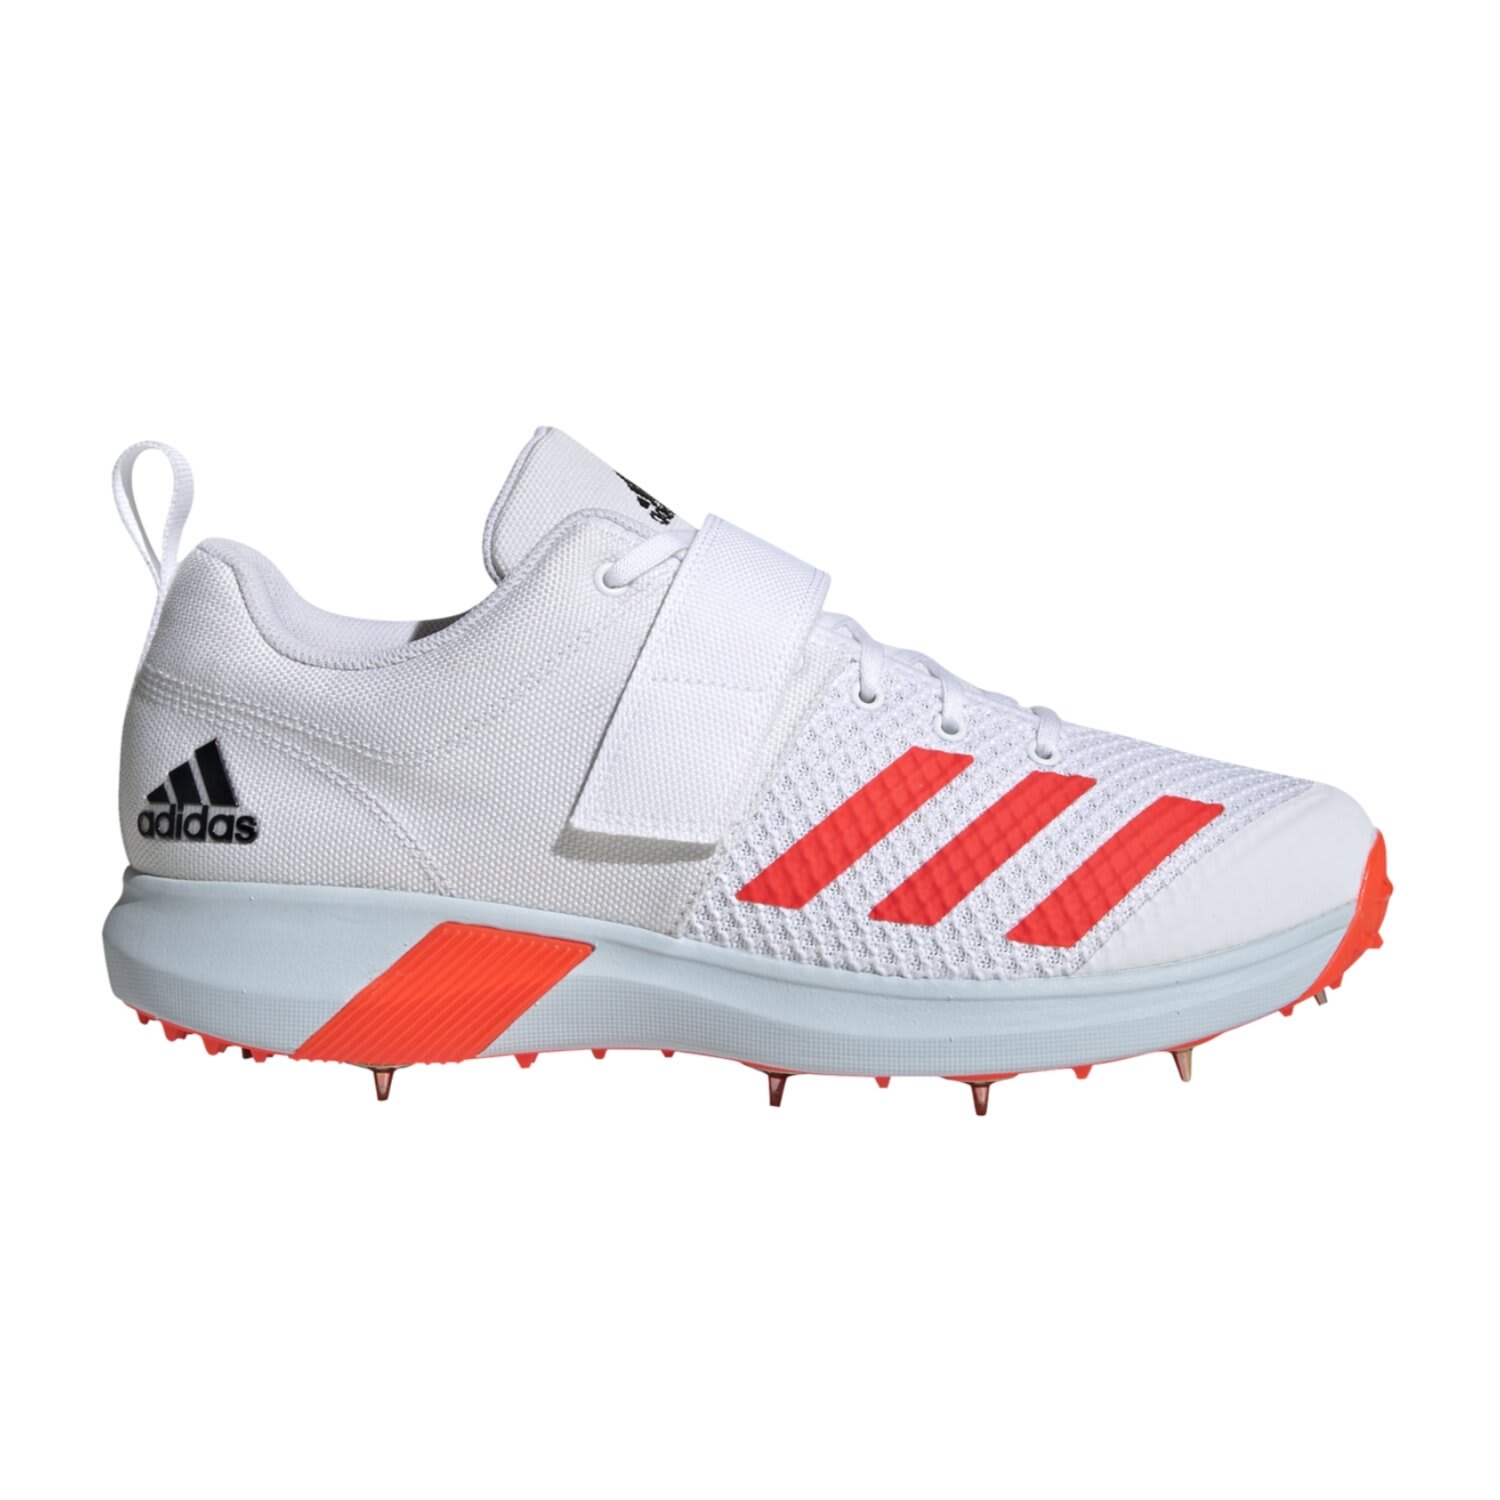 adidas Adipower Vector Cricket Shoes | Sportsmans Warehouse